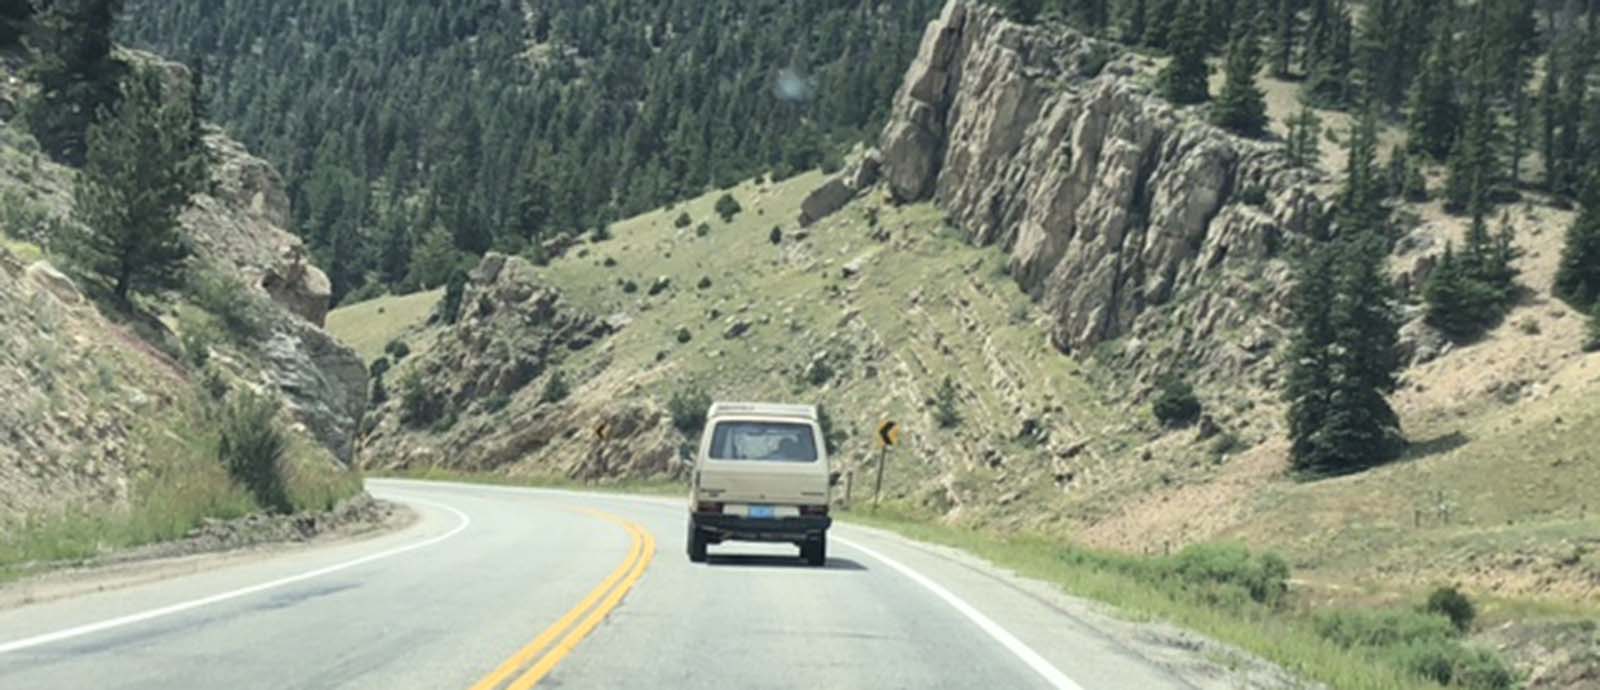 VW bus in a mountain pass